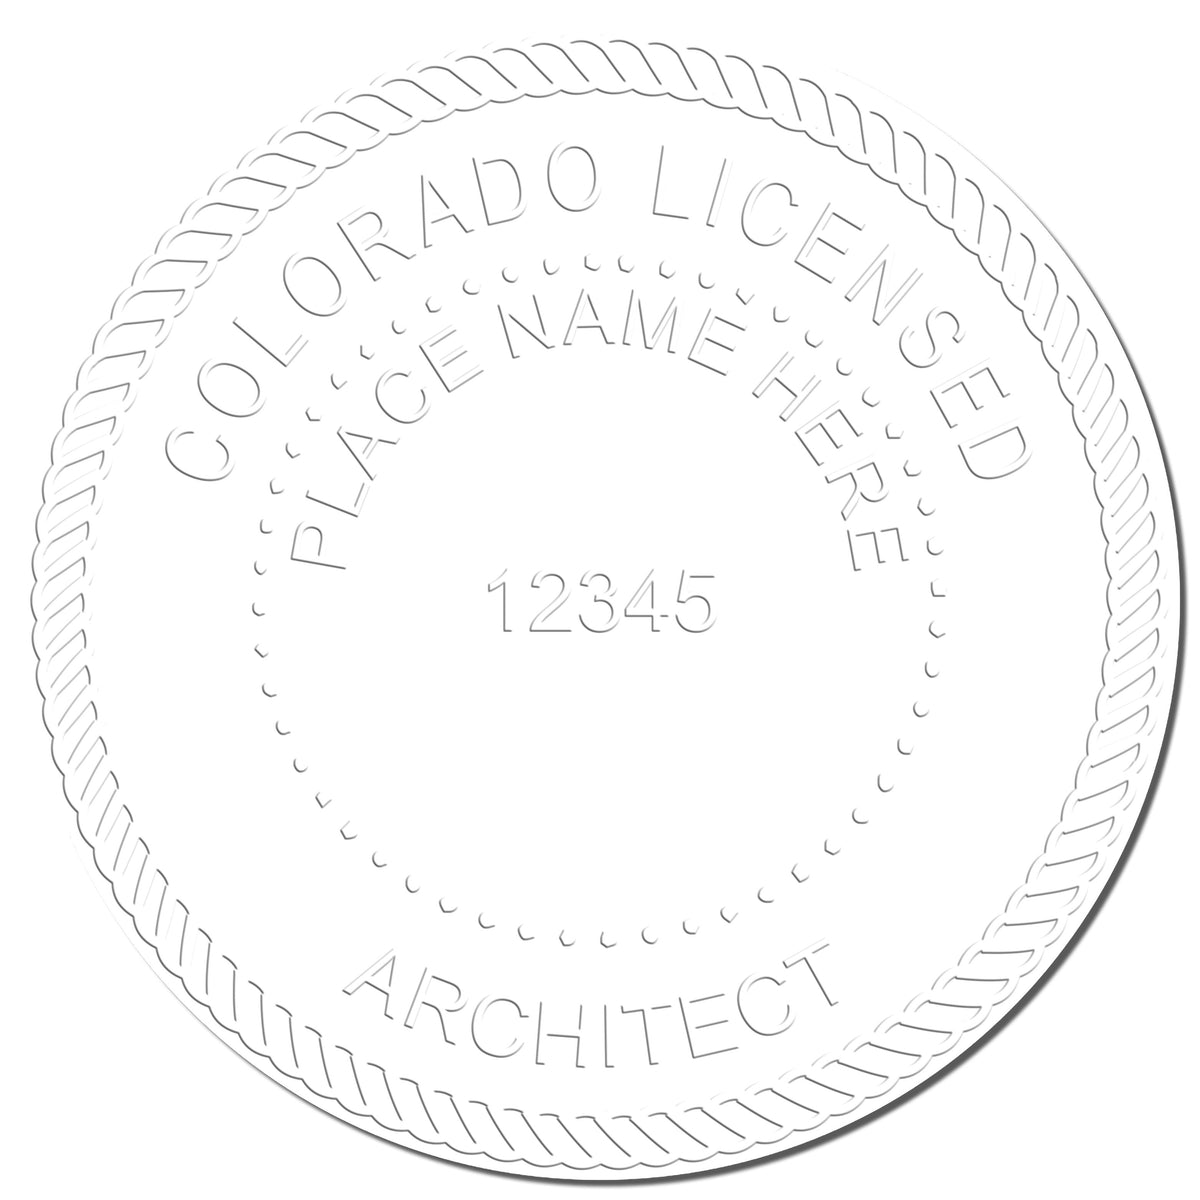 This paper is stamped with a sample imprint of the Gift Colorado Architect Seal, signifying its quality and reliability.